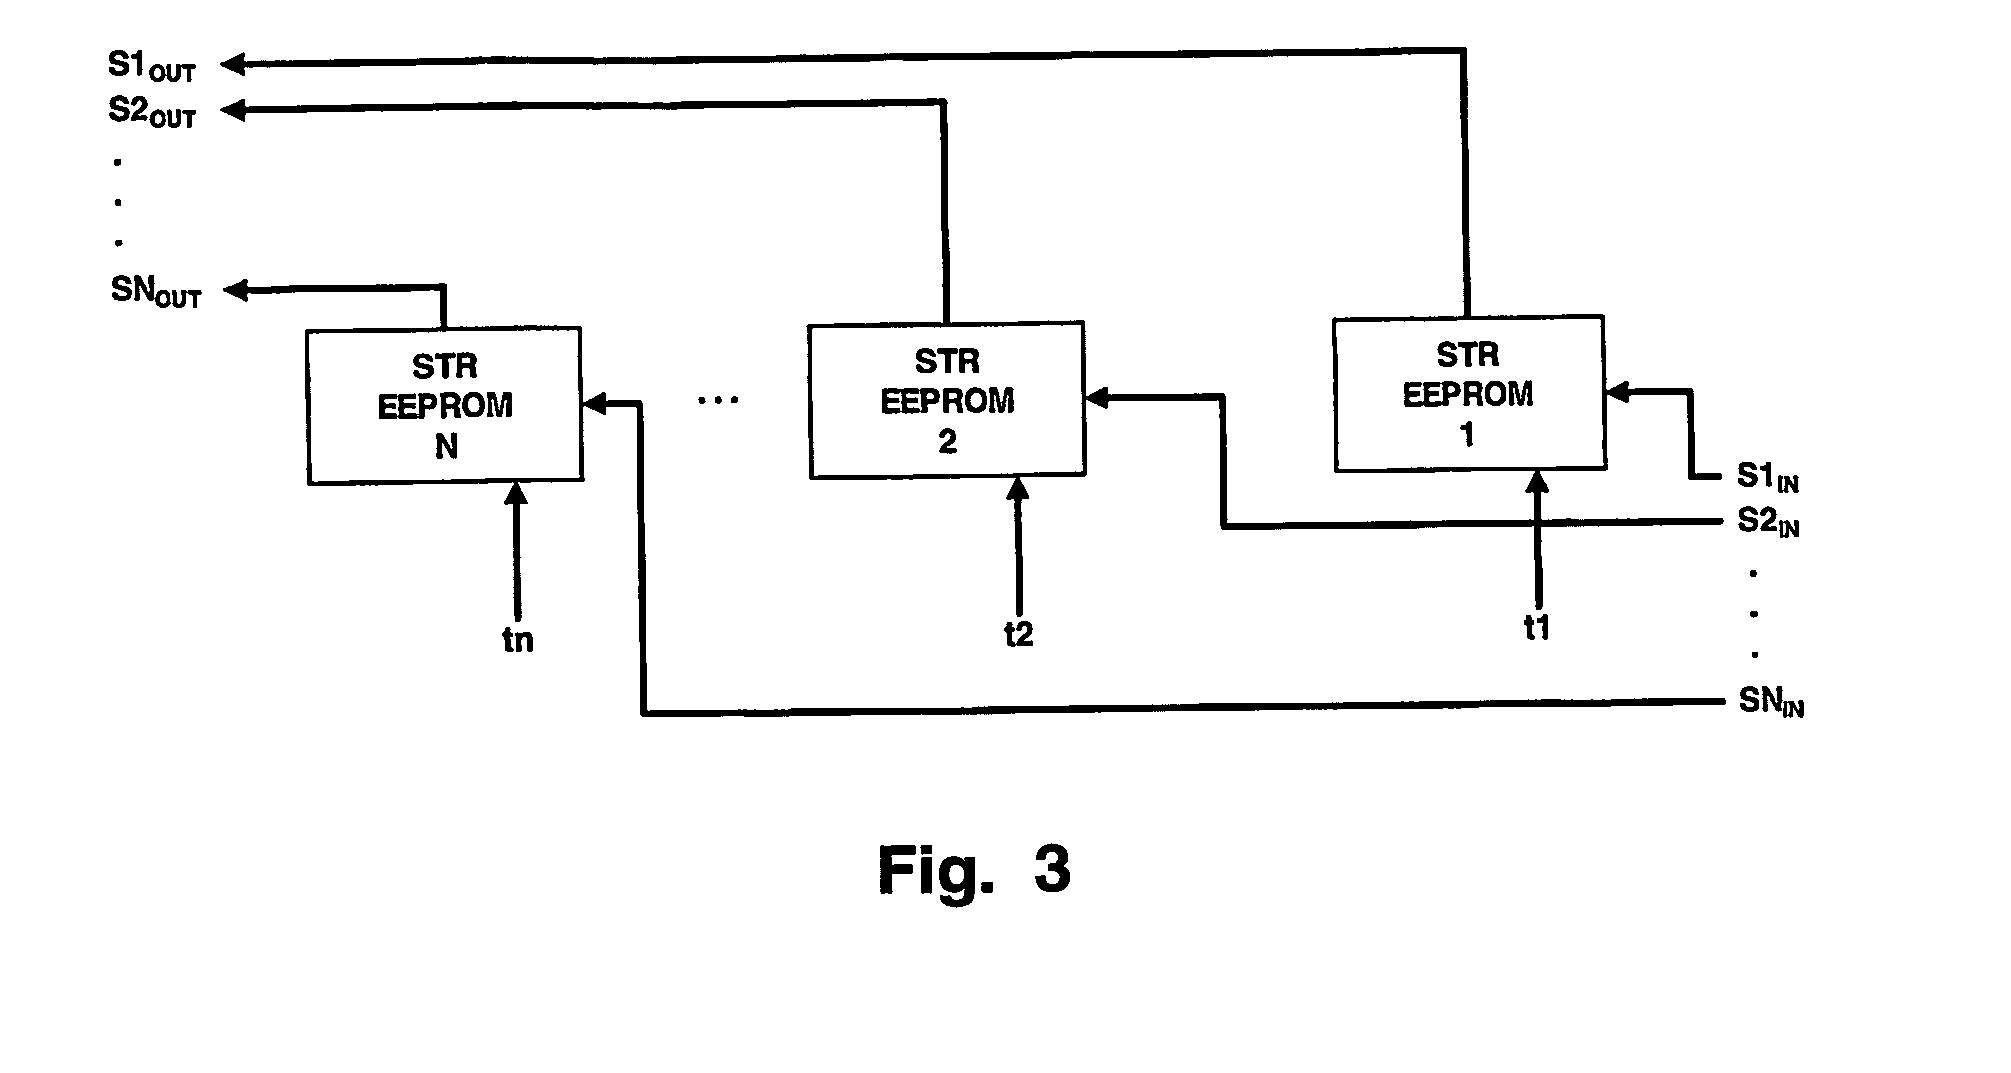 Channel acquisition processing for a television receiver